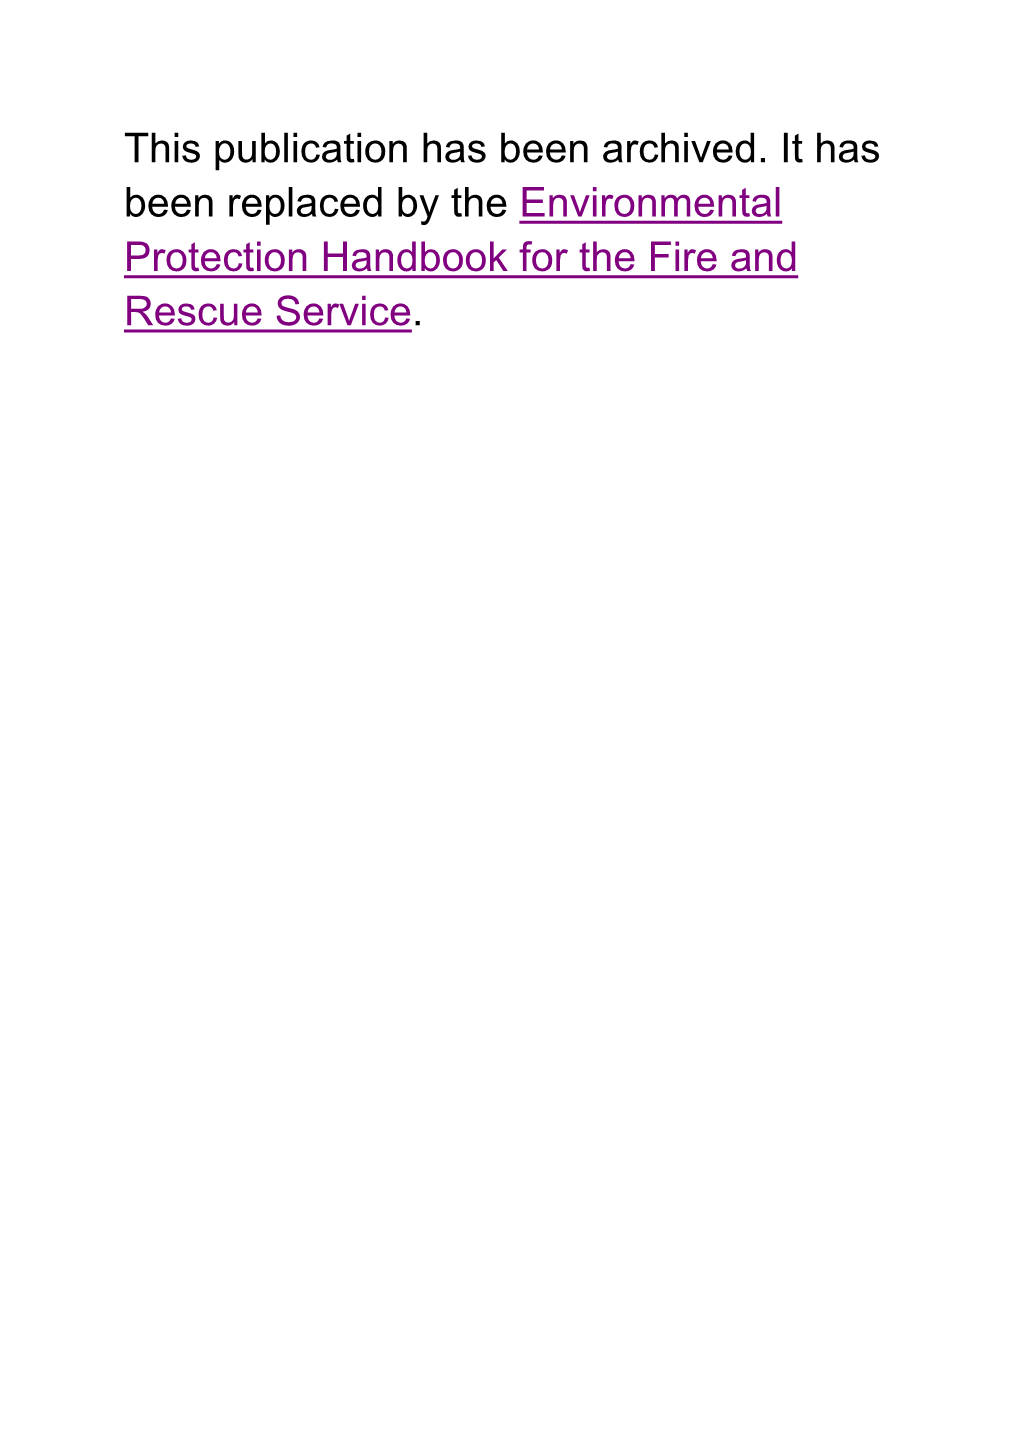 Environmental Protection Handbook for the Fire and Rescue Service